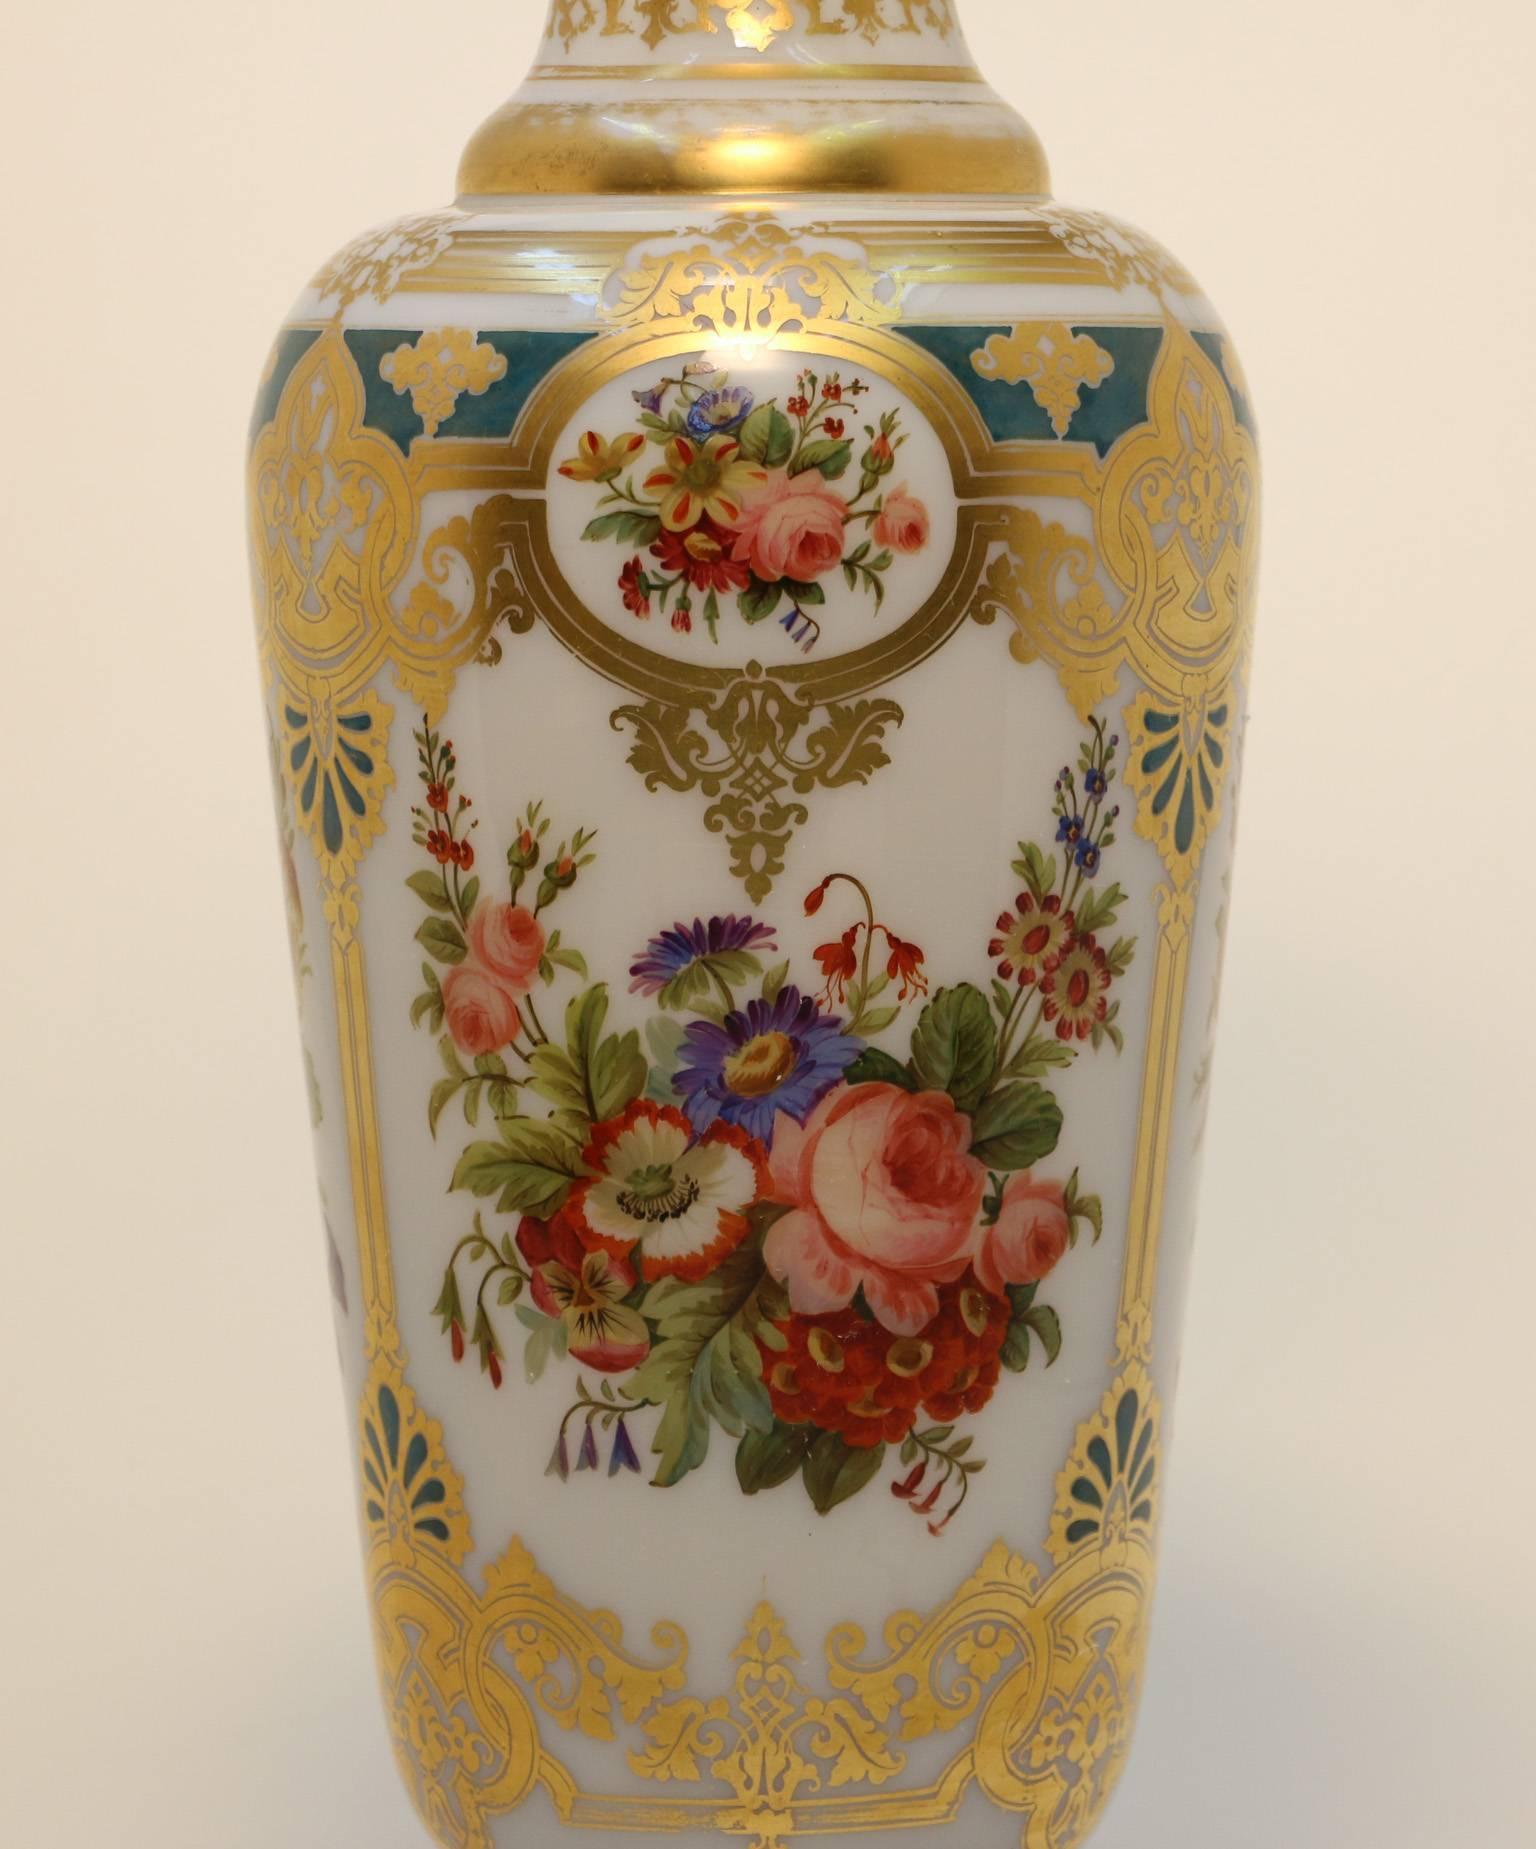 Napoleon III Superb large French opaline  glass vase, gilt and painted with flowers